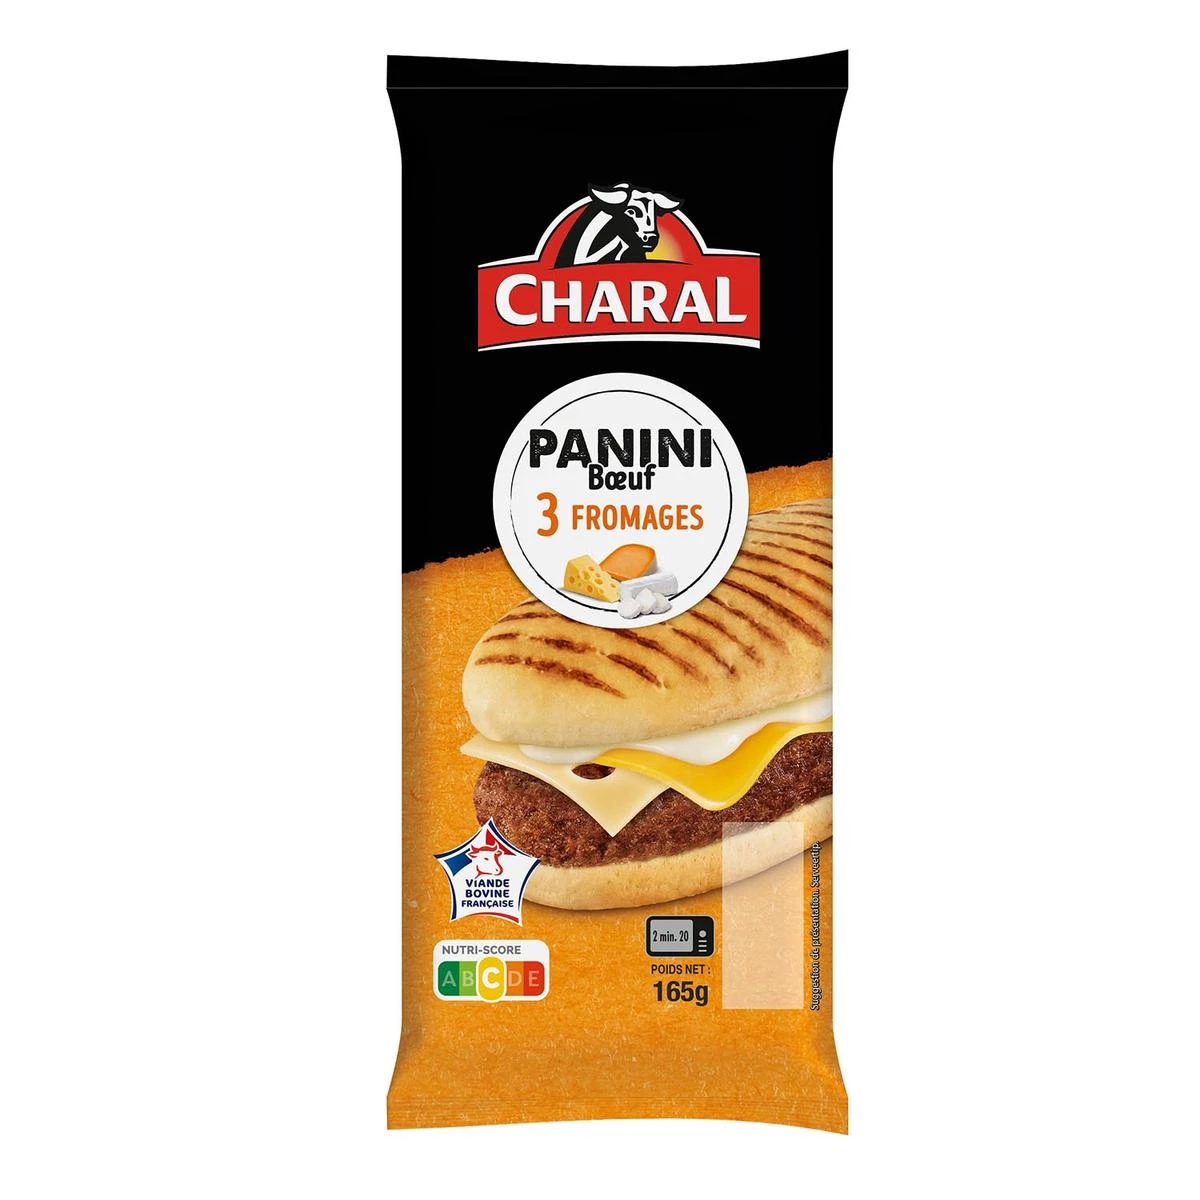 Panini 3 Fromages 165g - Charal